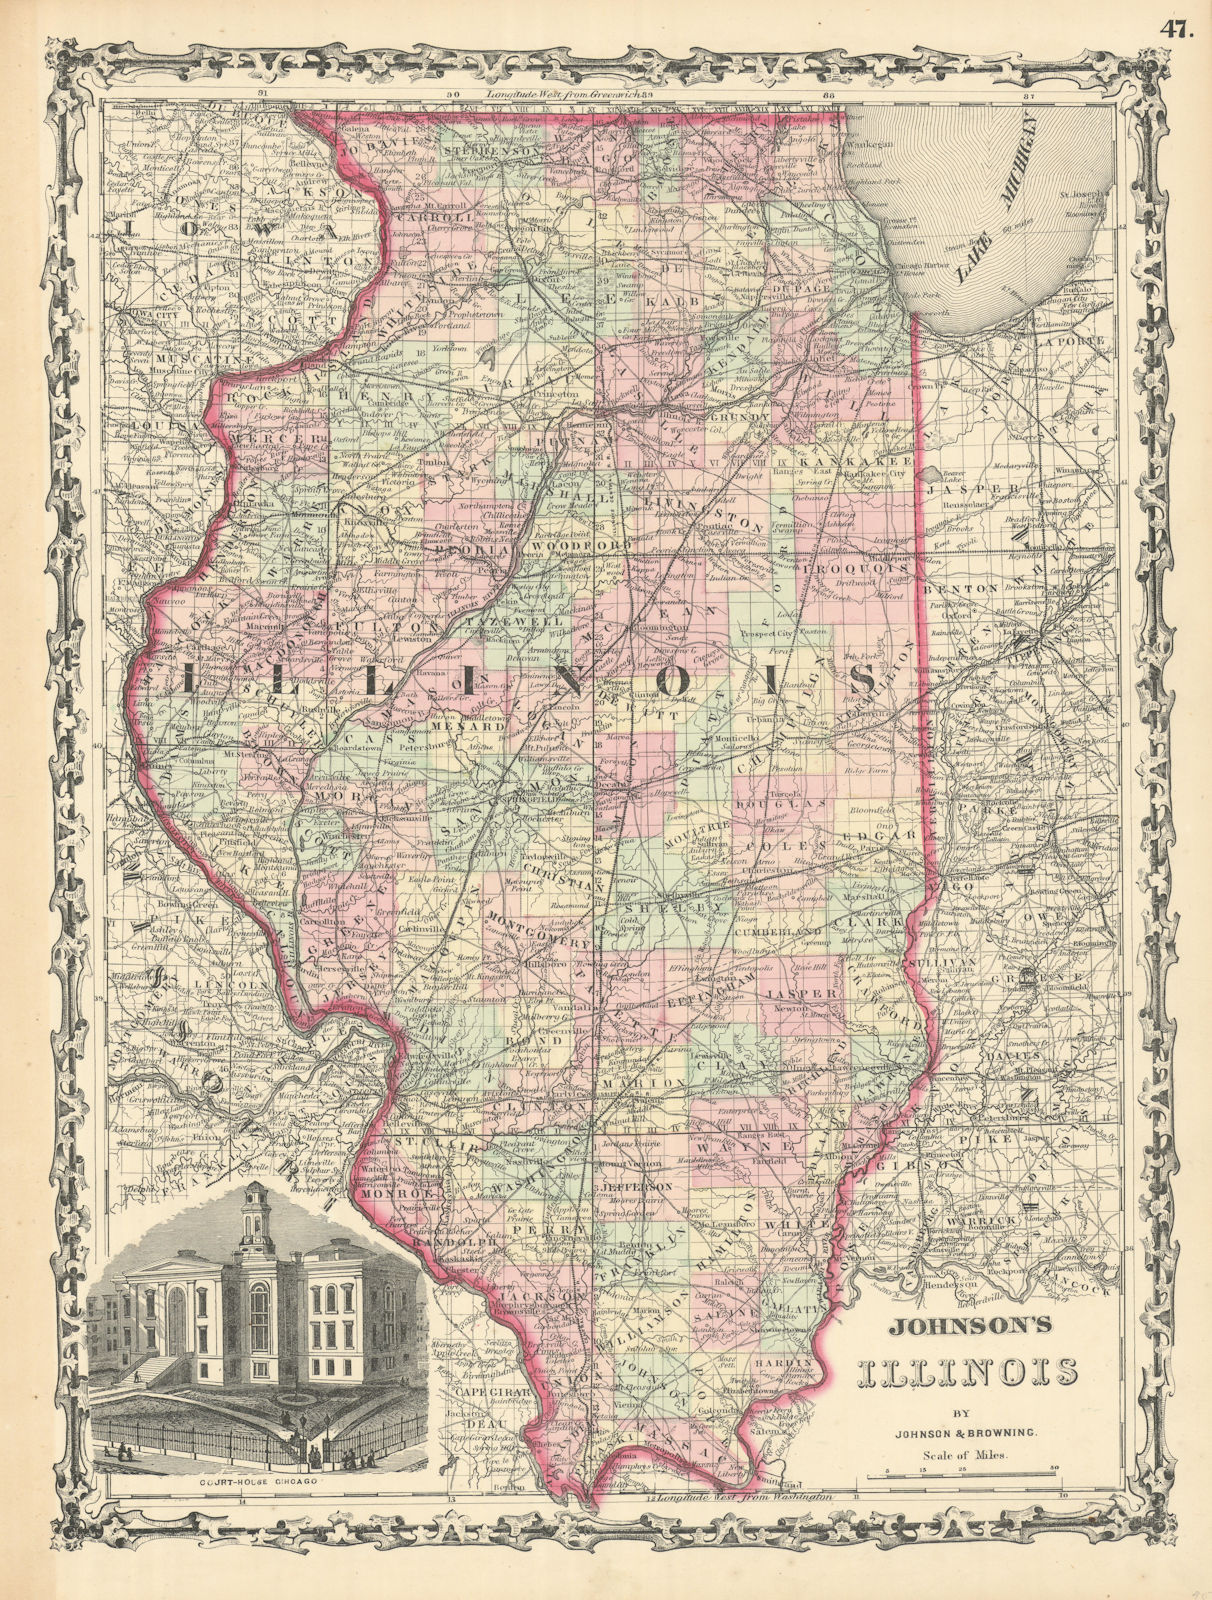 Associate Product Johnson's Illinois. US state map showing counties 1861 old antique chart